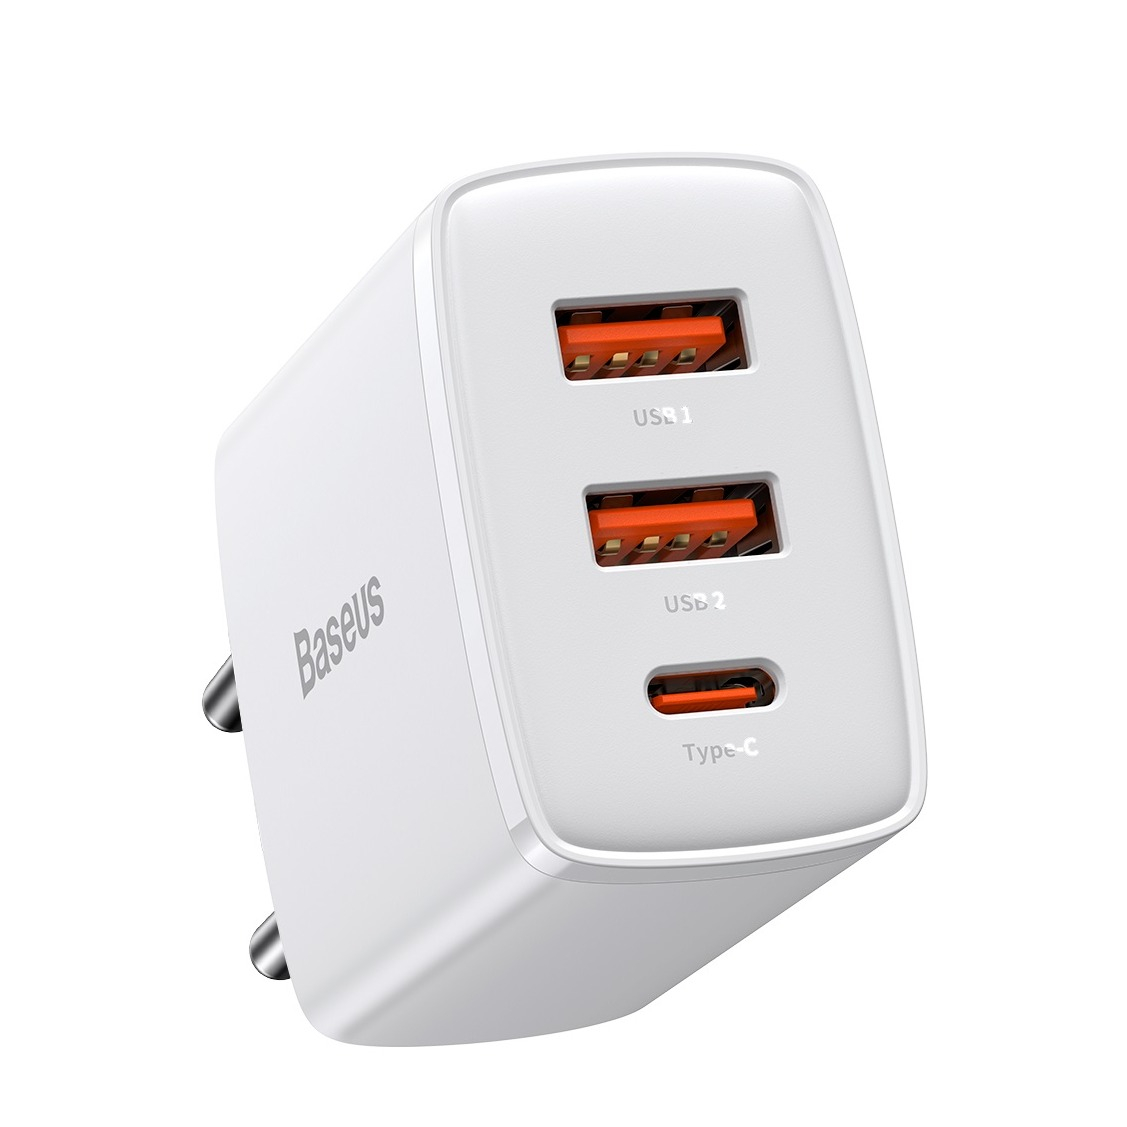 Image of Baseus - (30W) Dual USB / USB C Quick Charge QC 3.0 Ladegerät mit Power Delivery 3.0 - Weiss bei Apfelkiste.ch